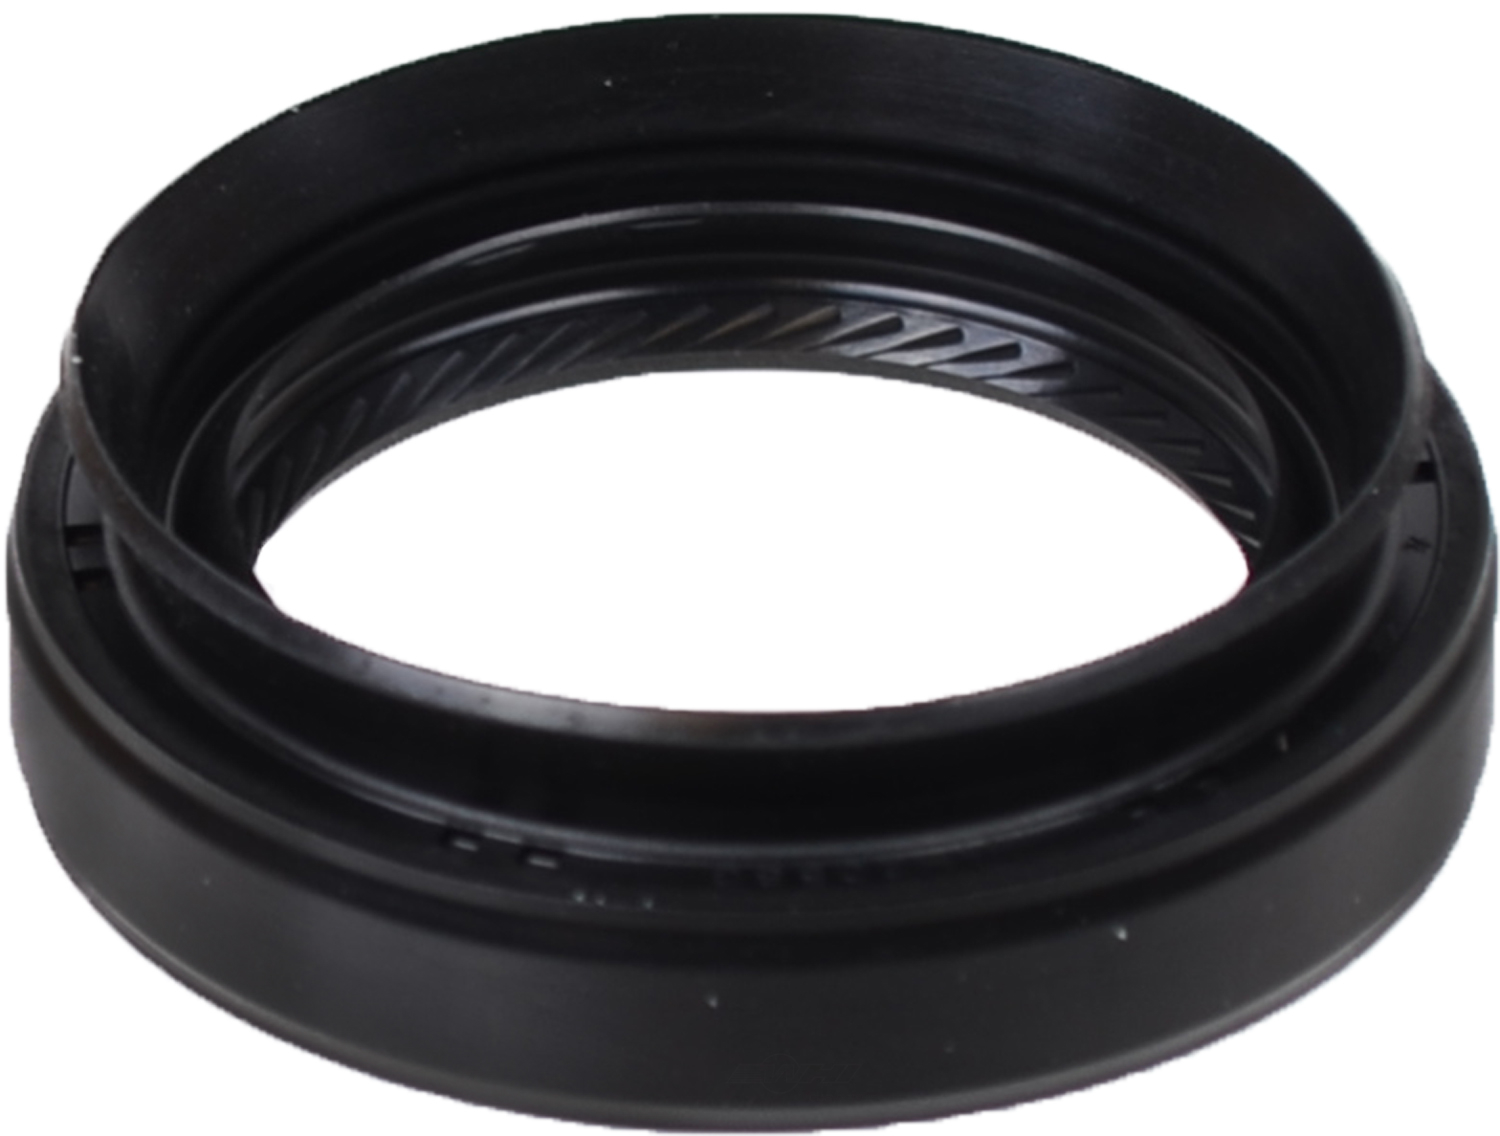 SKF (CHICAGO RAWHIDE) - Manual Trans Output Shaft Seal (Left) - SKF 13770A